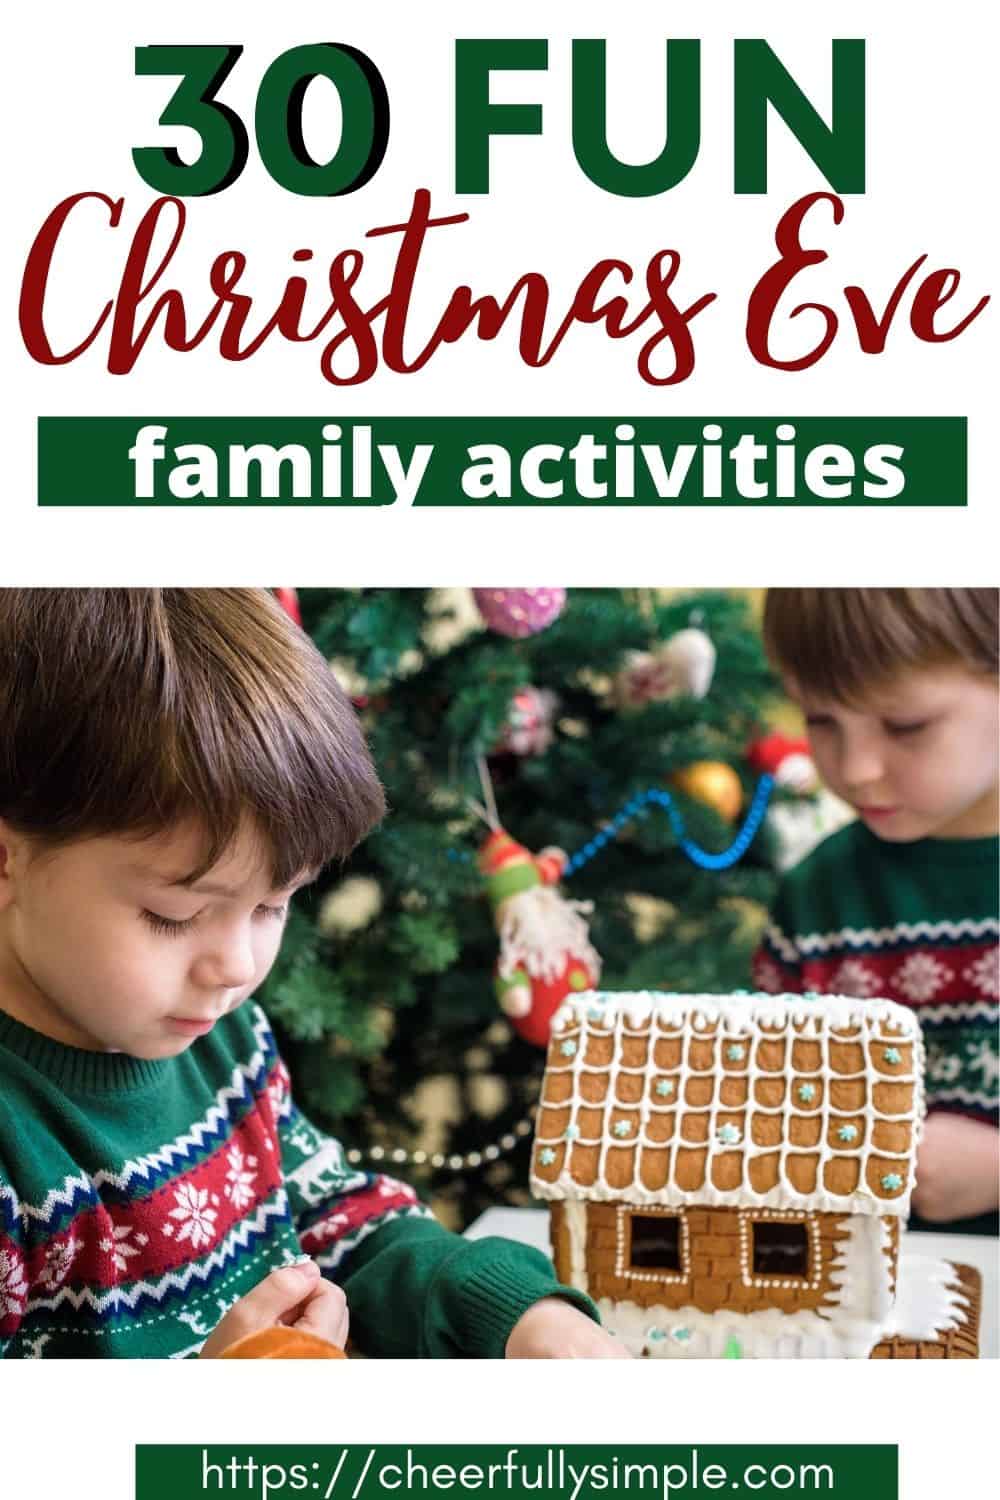 30 Fun Christmas Eve Activities for Families 2021 Cheerfully Simple